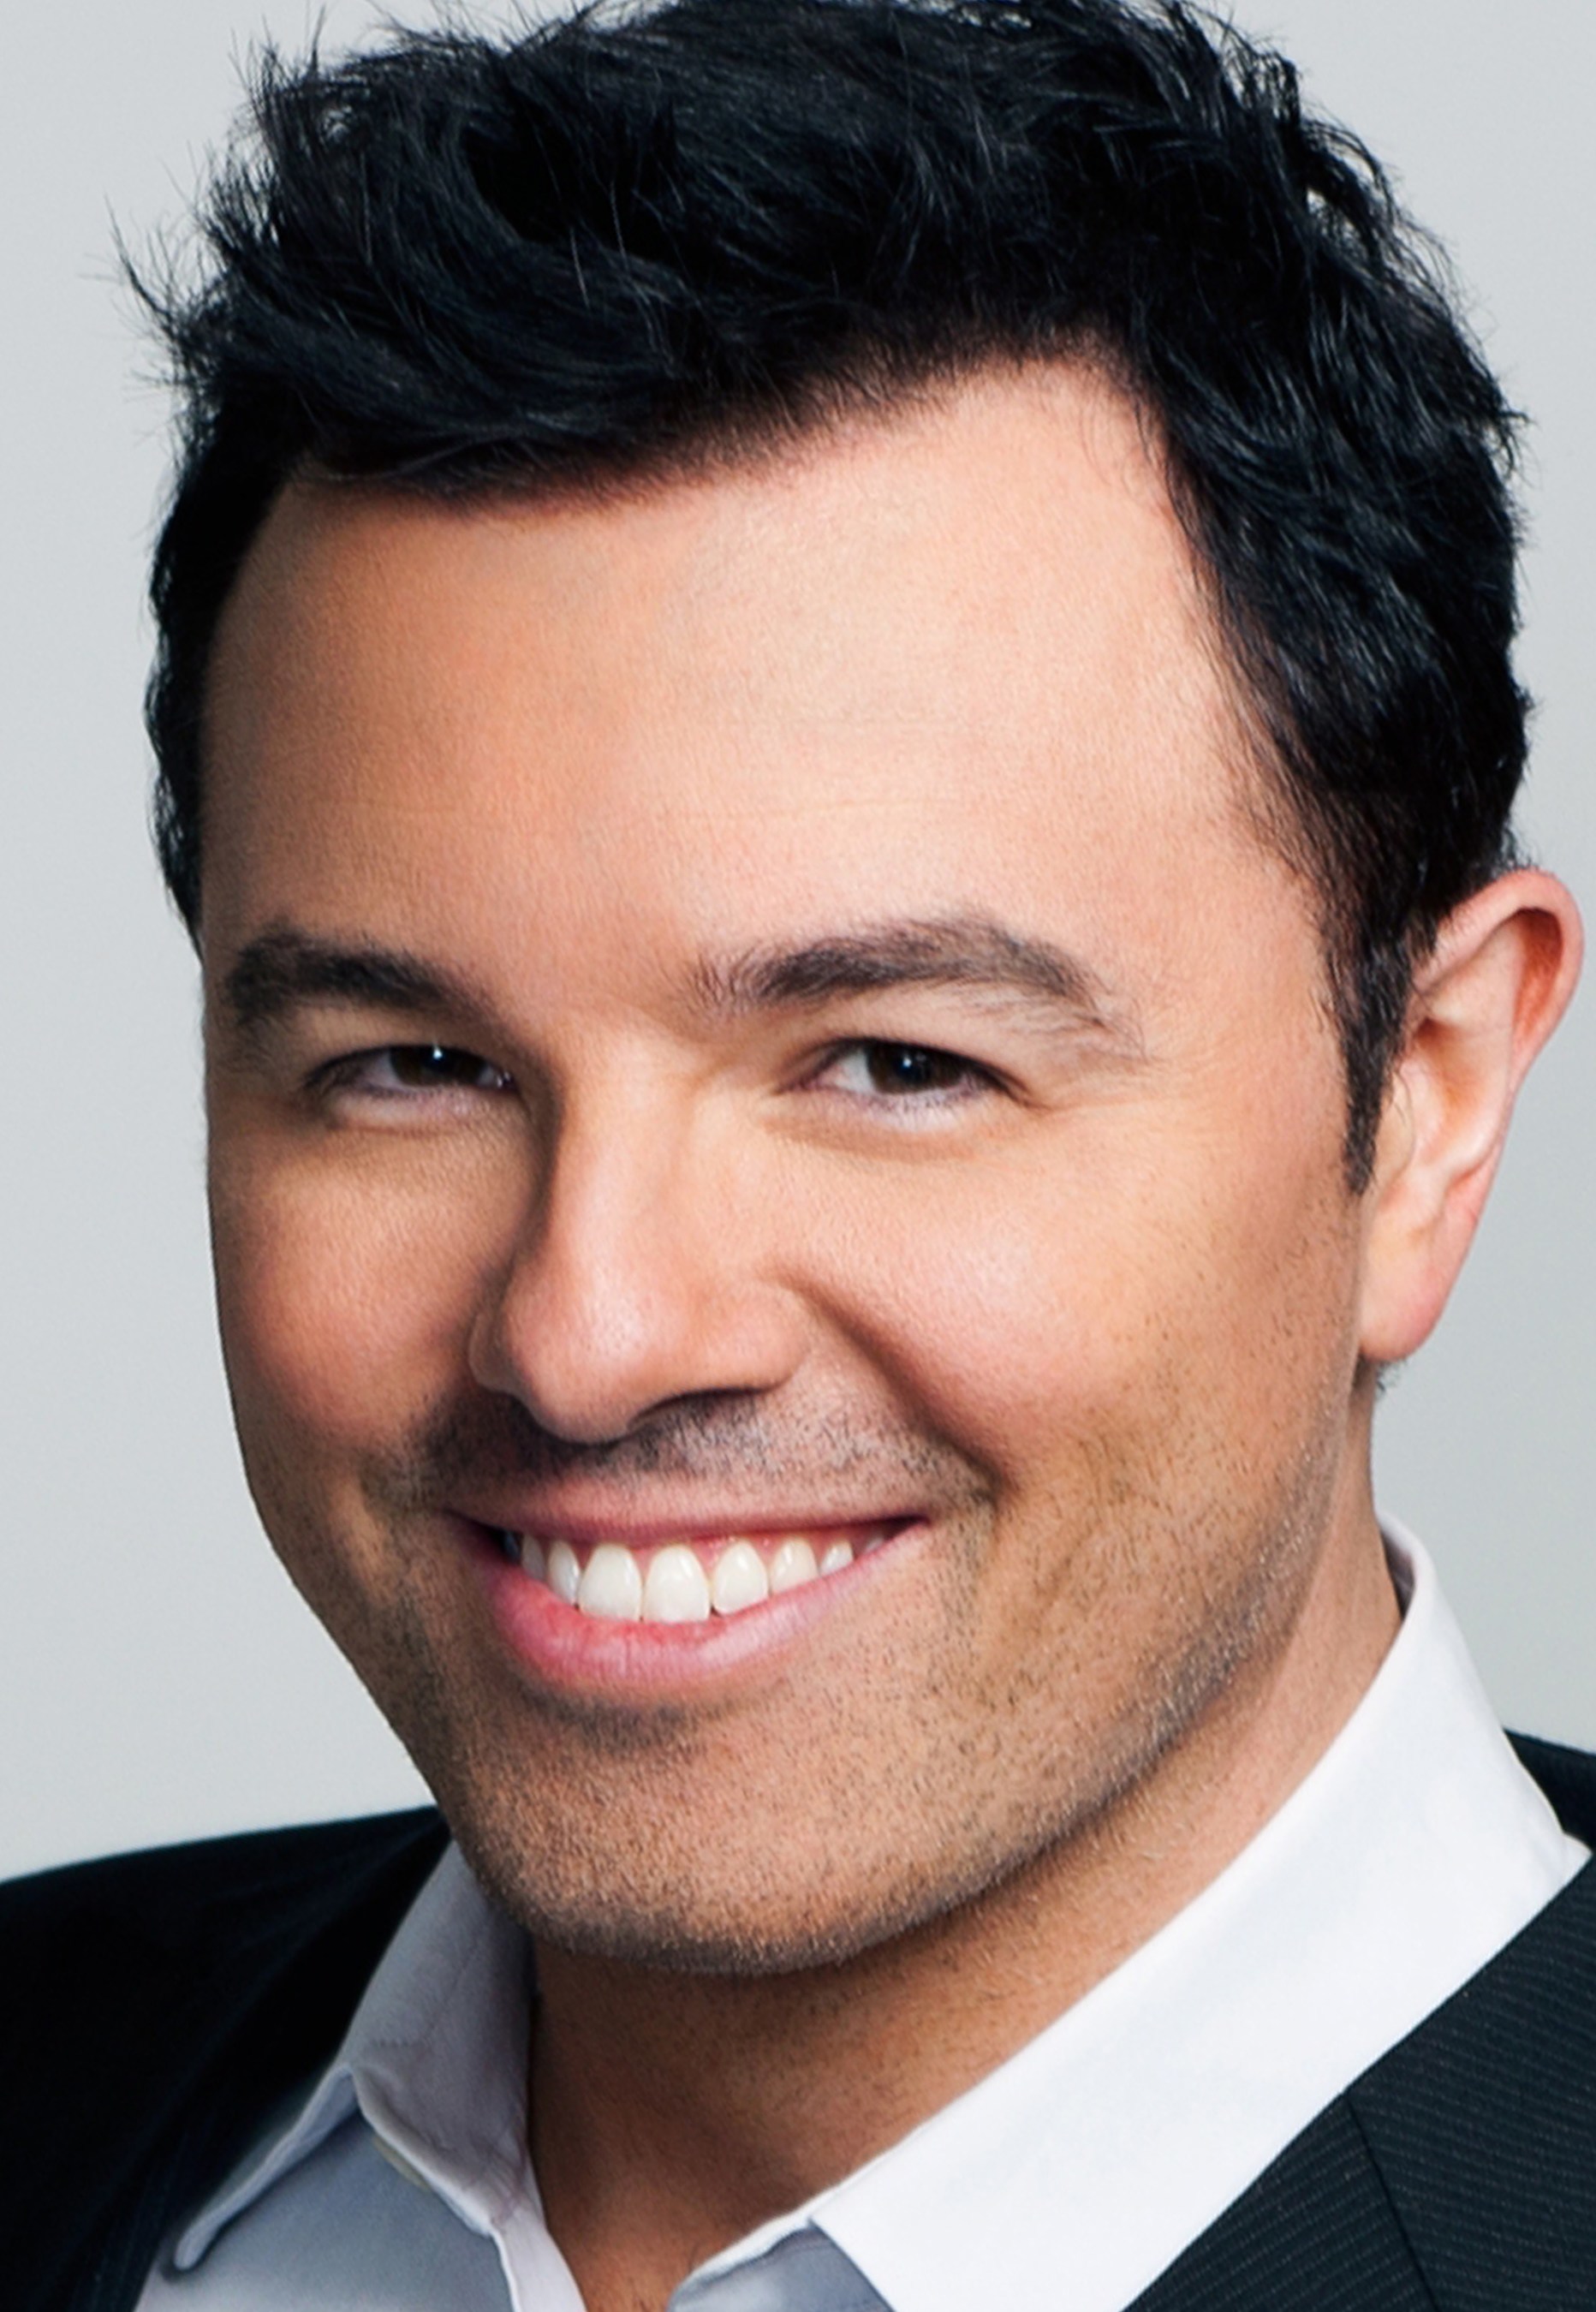 Four-time Grammy nominated singer Seth MacFarlane will bring his renowned talents to the Encore Theater Stage at Wynn Las Vegas for a two-night engagement at 7:30 p.m. on April 29 and 30.